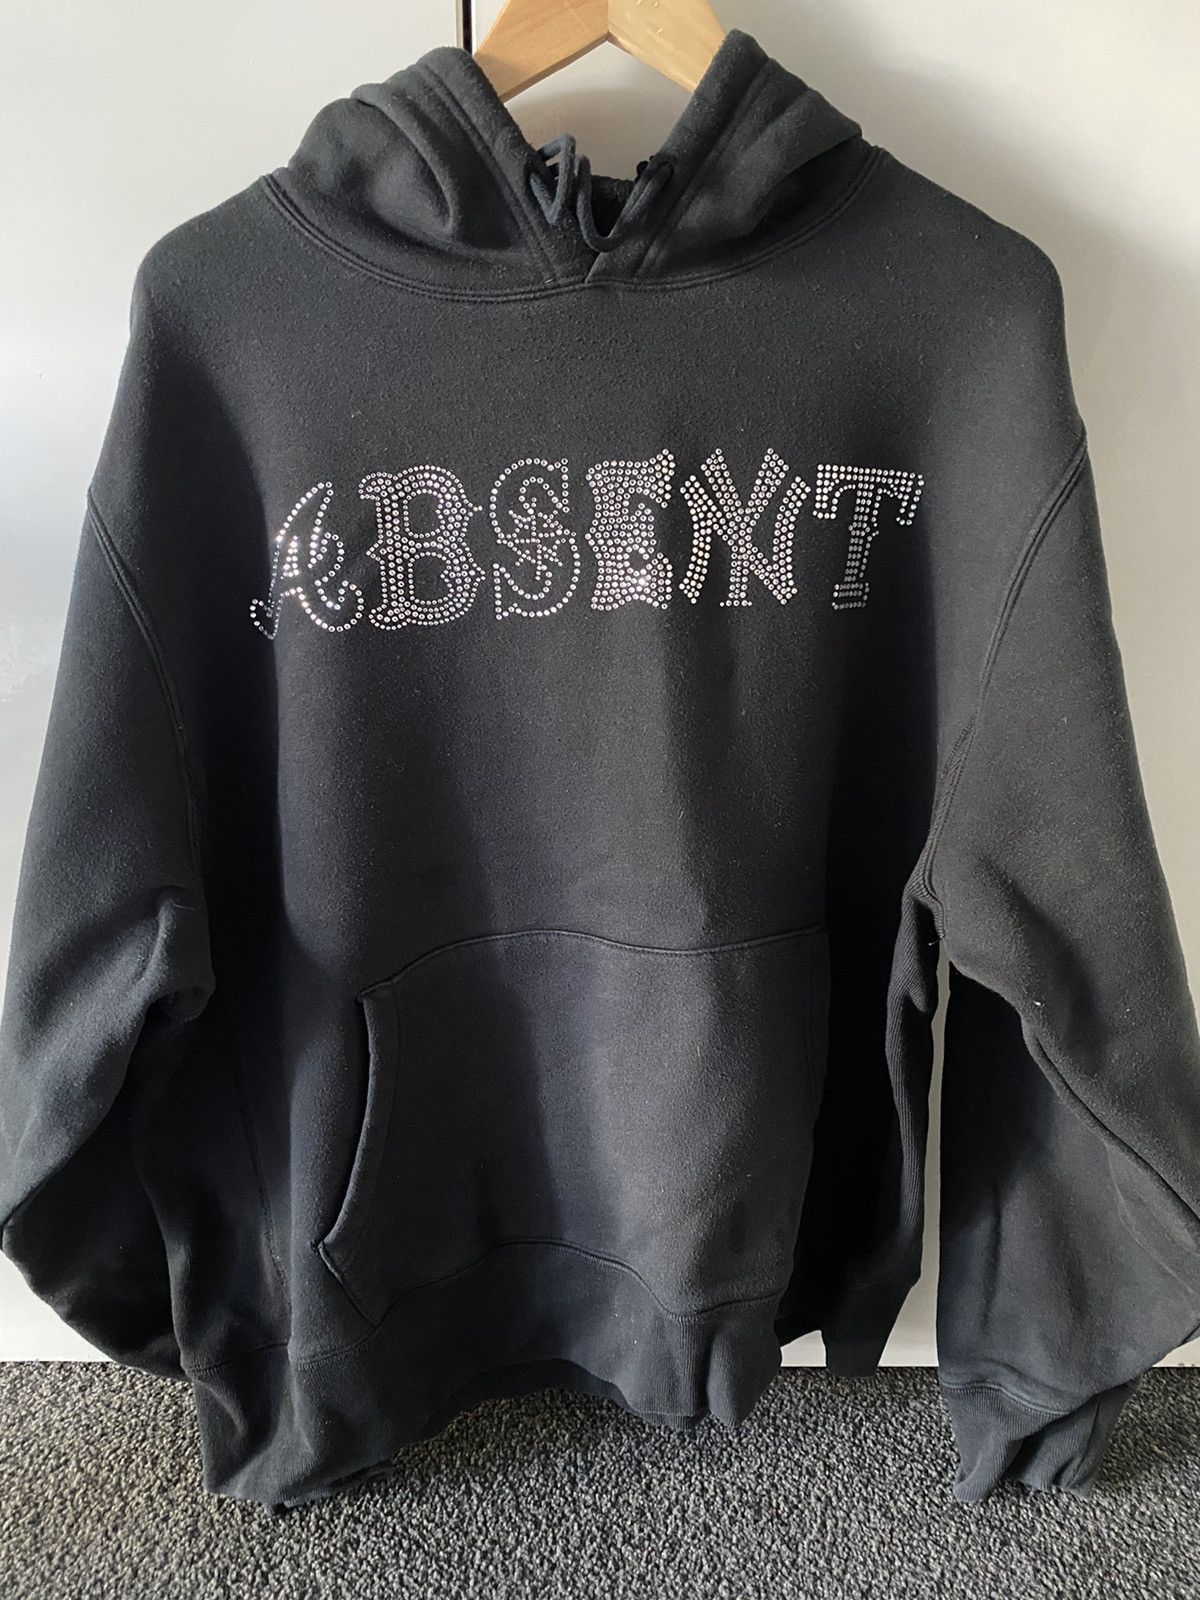 Absent Absent Rhinestone Hoodie Black Size US XXL / EU 58 / 5 - 1 Preview